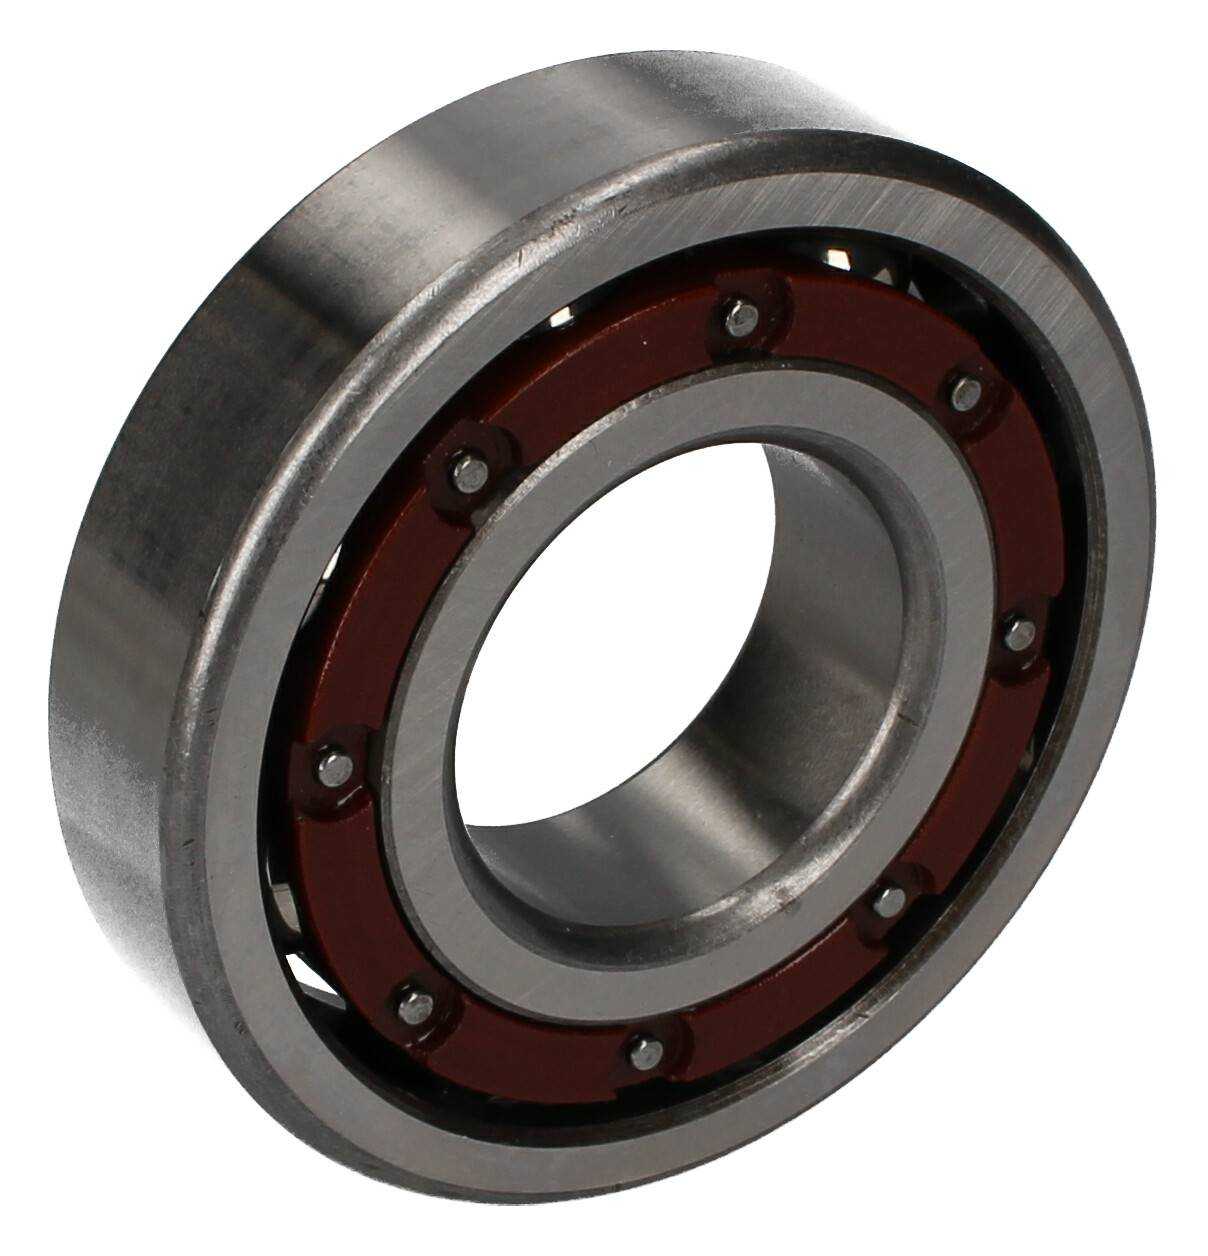 HIGH SPEED BALL BEARING 3205-THB-P6-FAG (WITHOUT PACKAGING) - Image 1